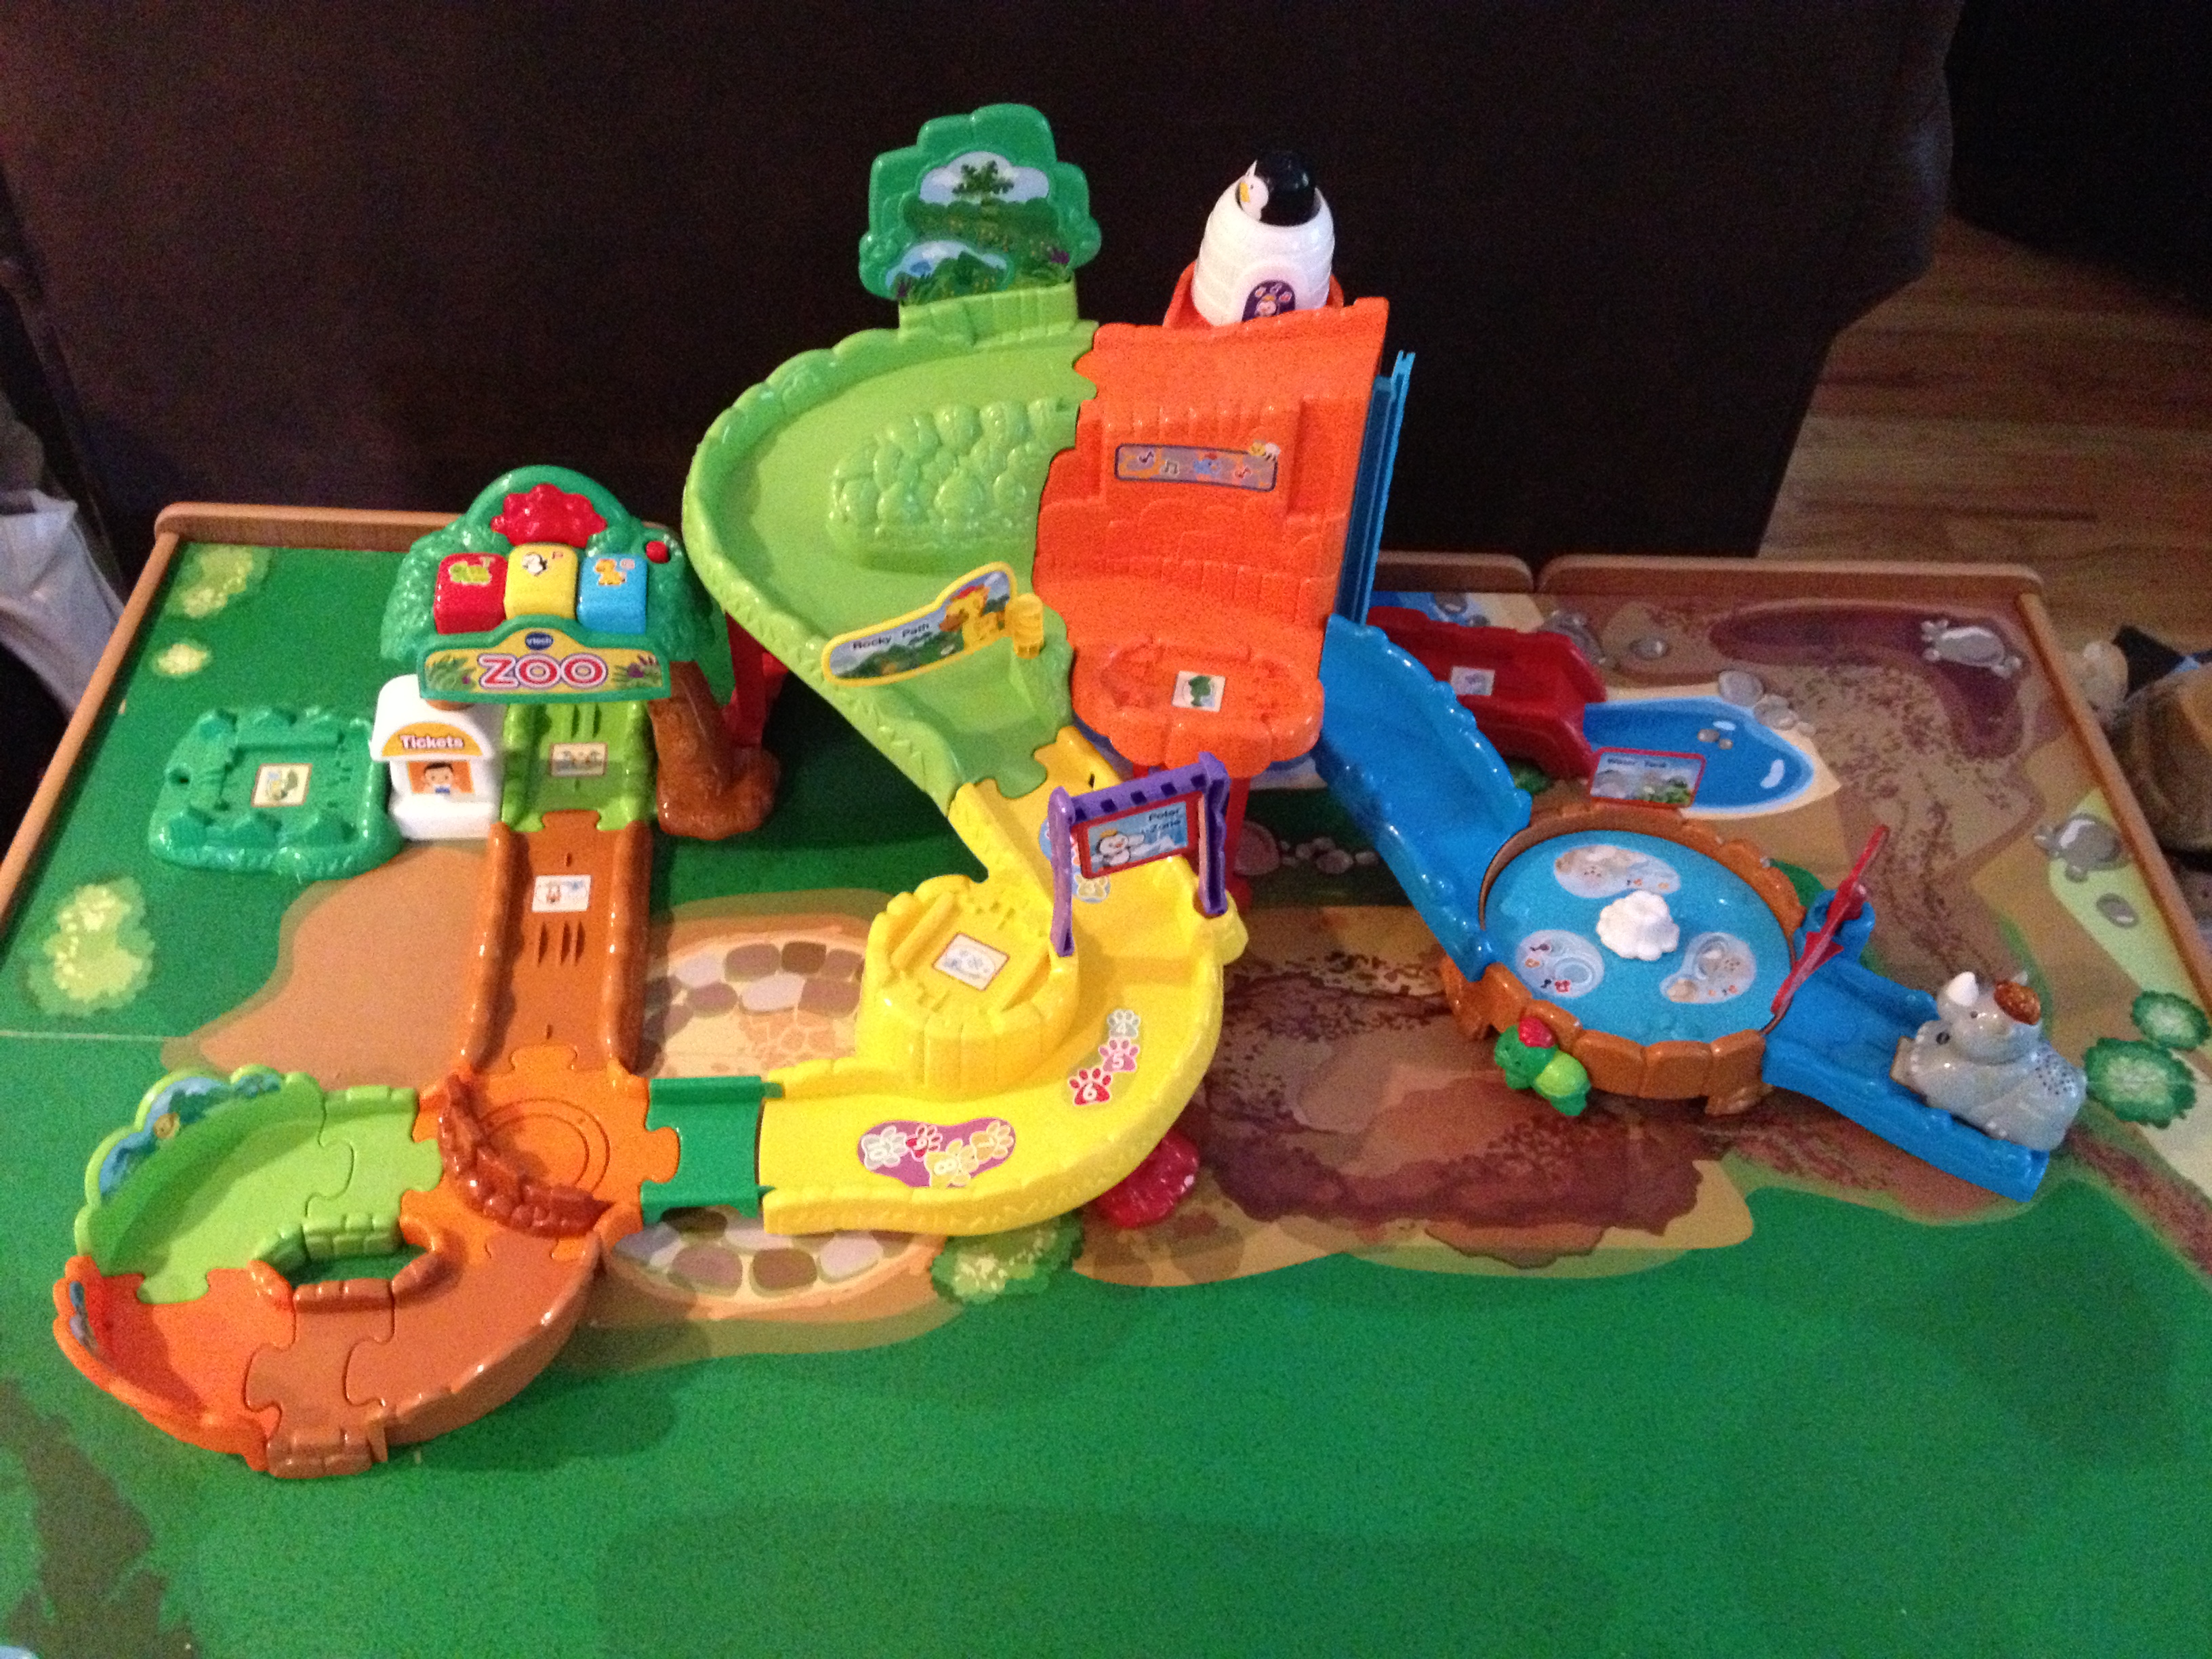 Go! Go! Smart Animals Zoo Explorers Playset offers hours of fun and adventure!